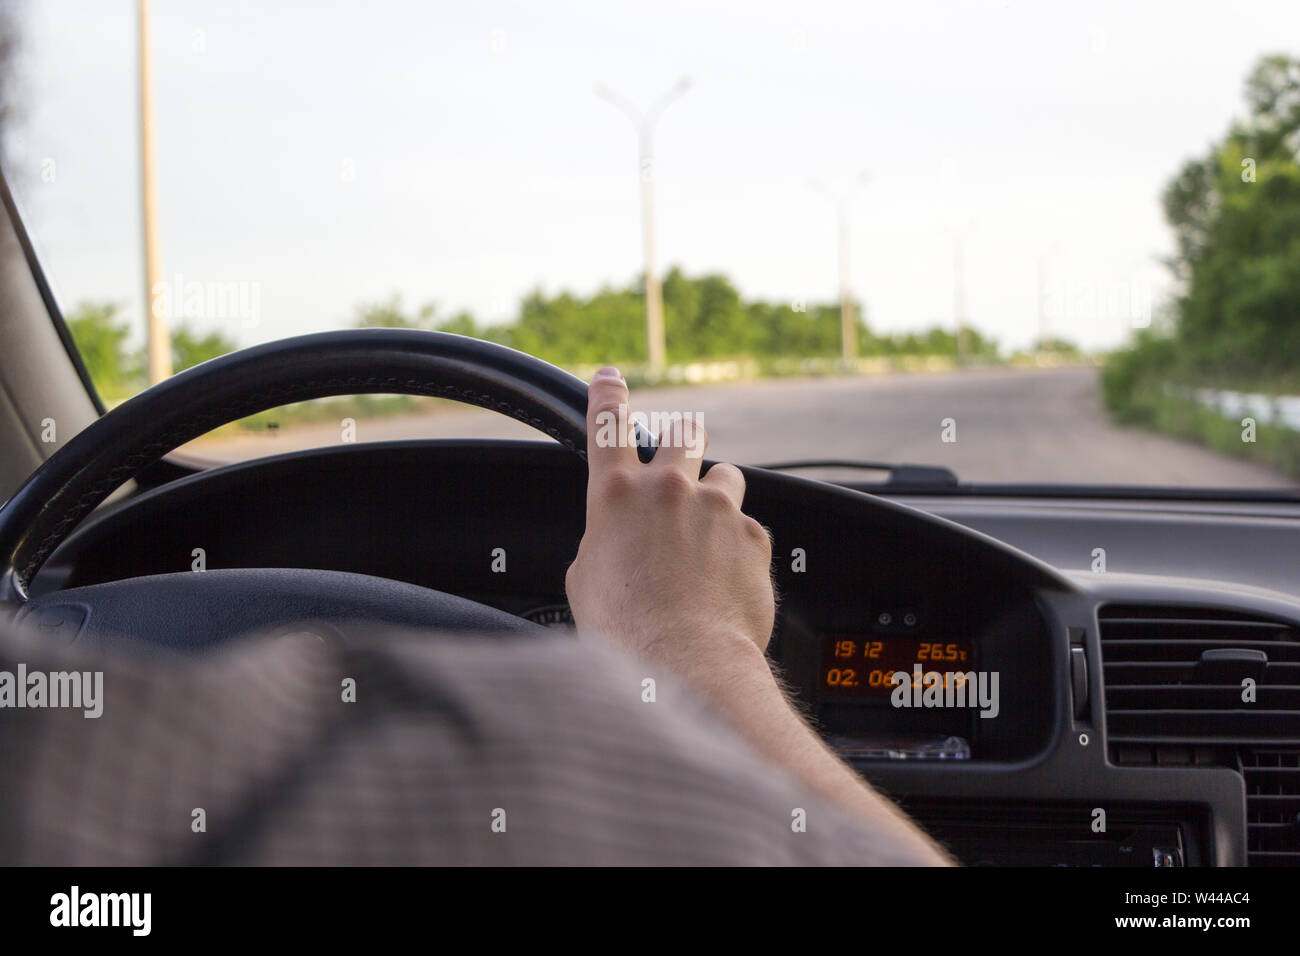 Mens hand keep hold on steering wheel while driving a car on road. View from behind. Safe driving concept. Summer day, green trees outside.  Black old Stock Photo